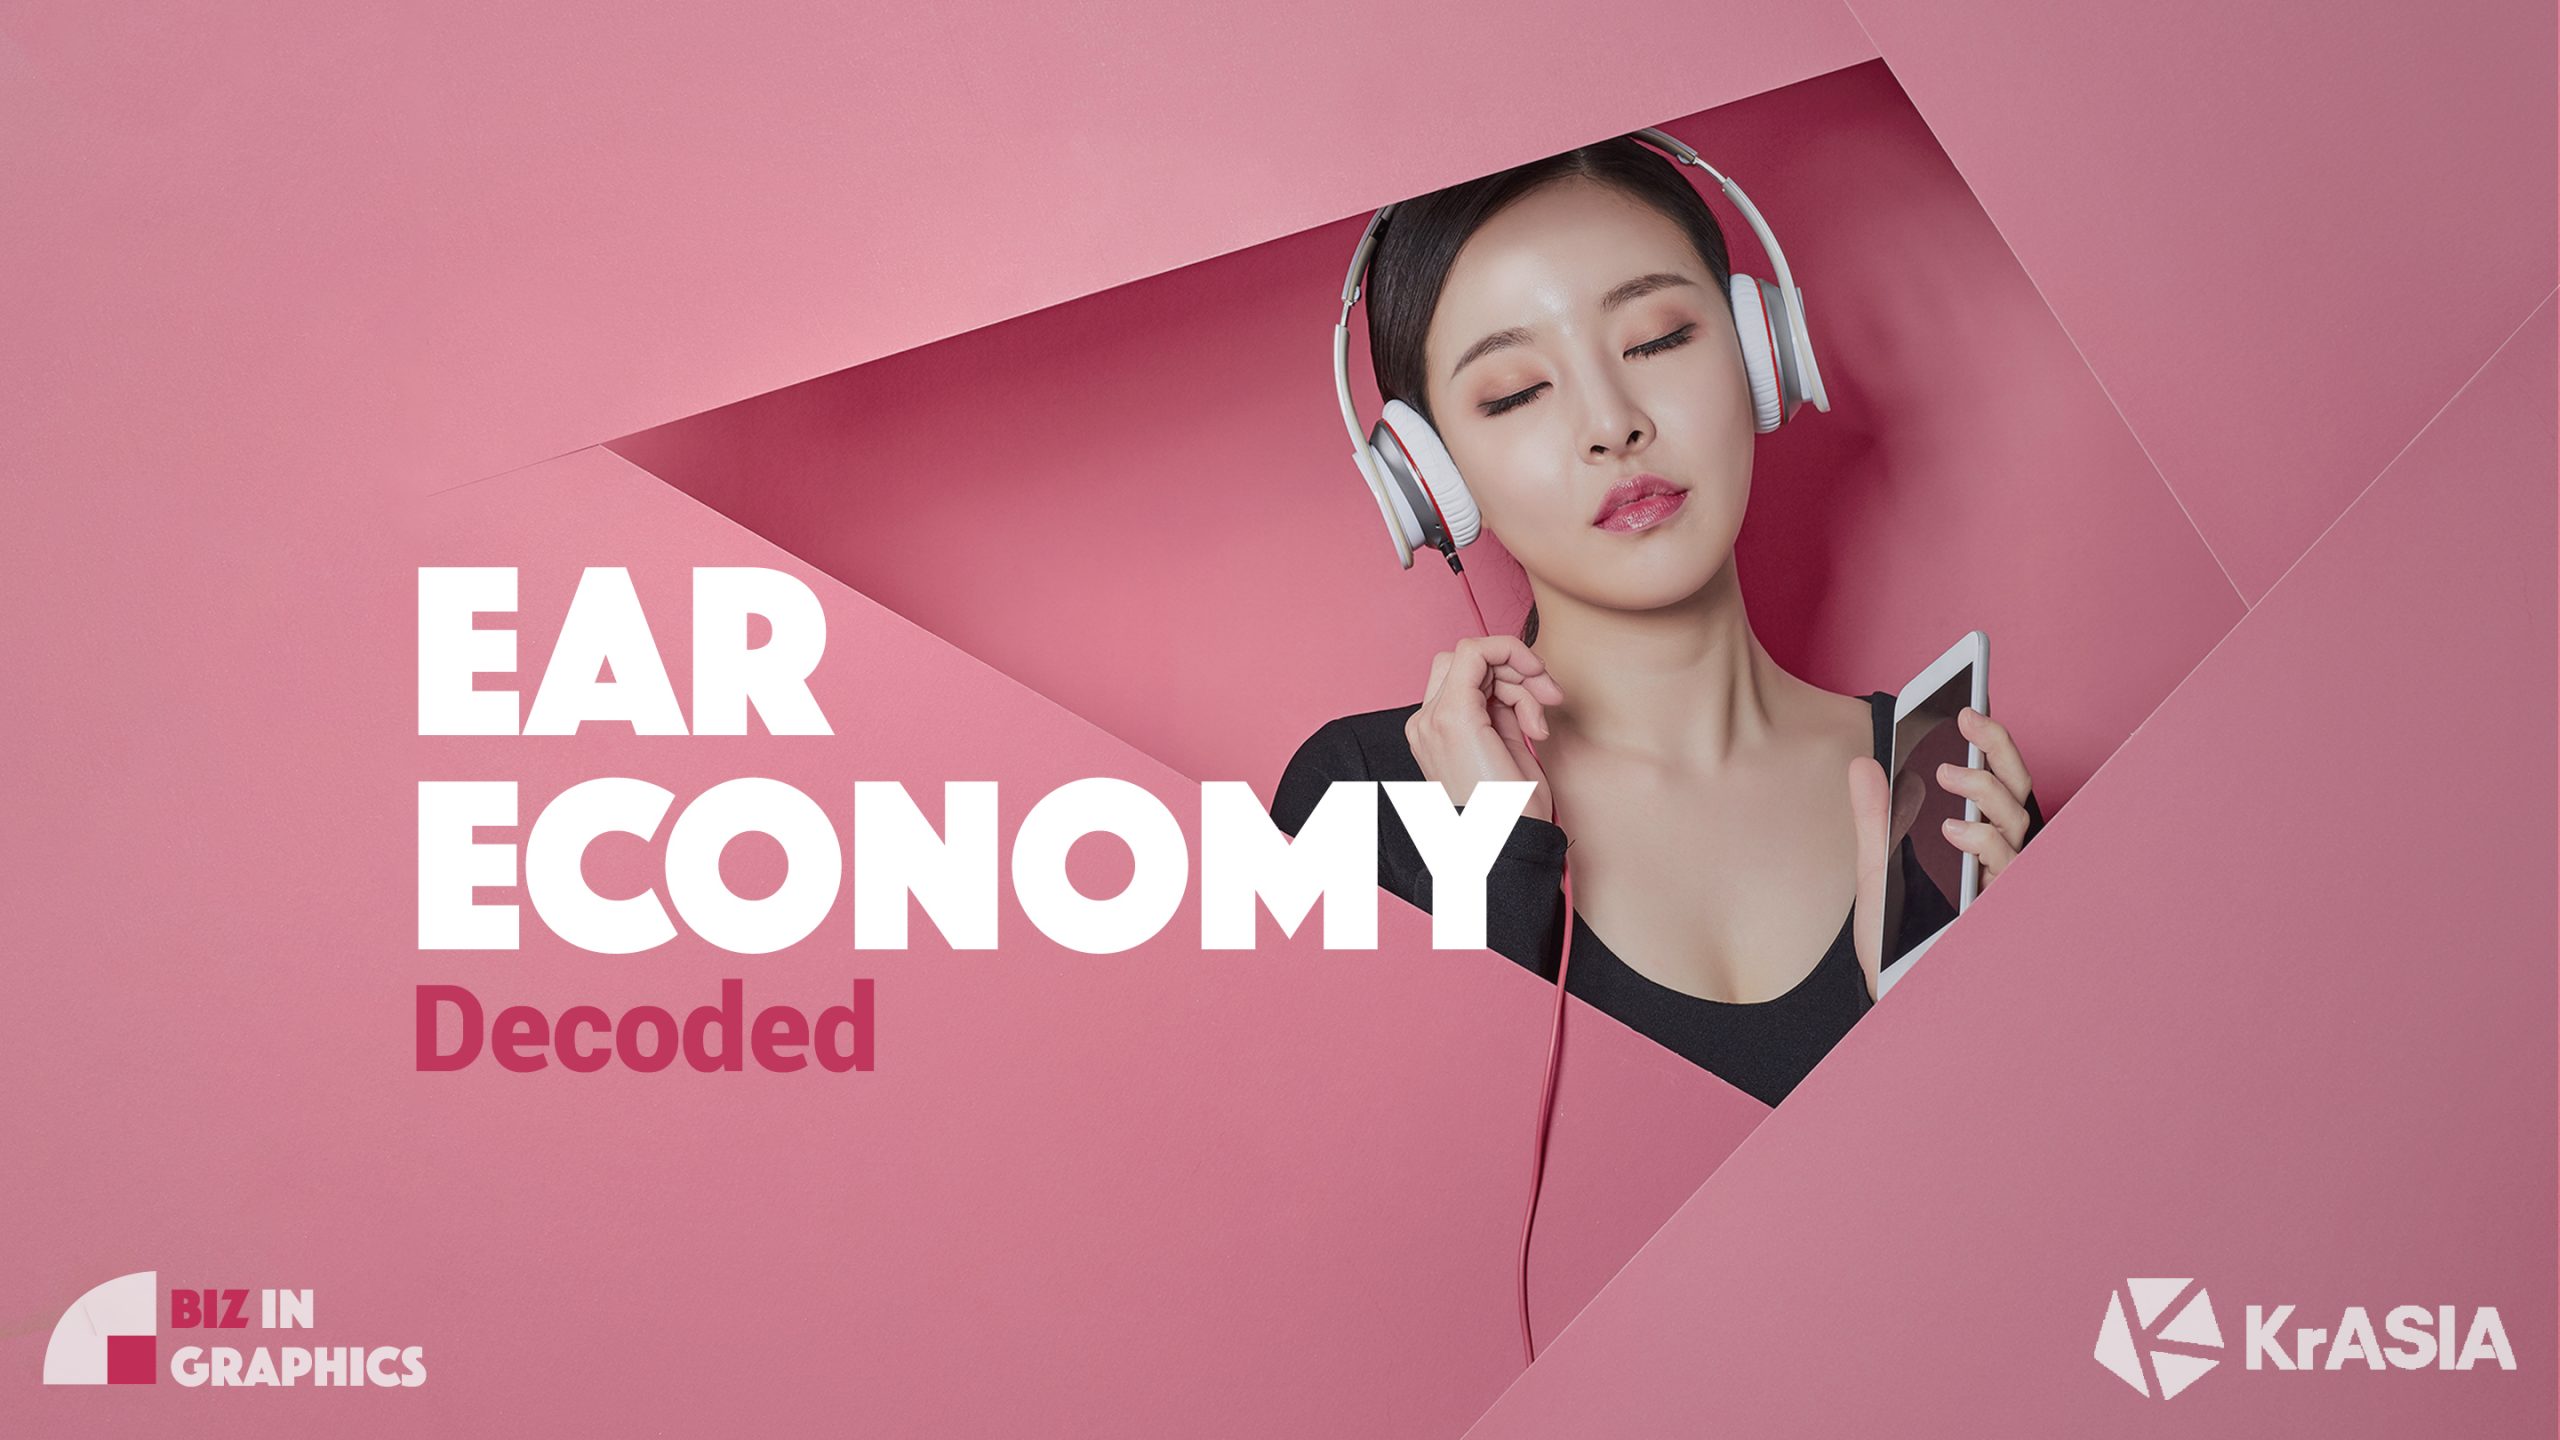 Meet the players competing for China’s USD 3.8 billion ‘ear economy’